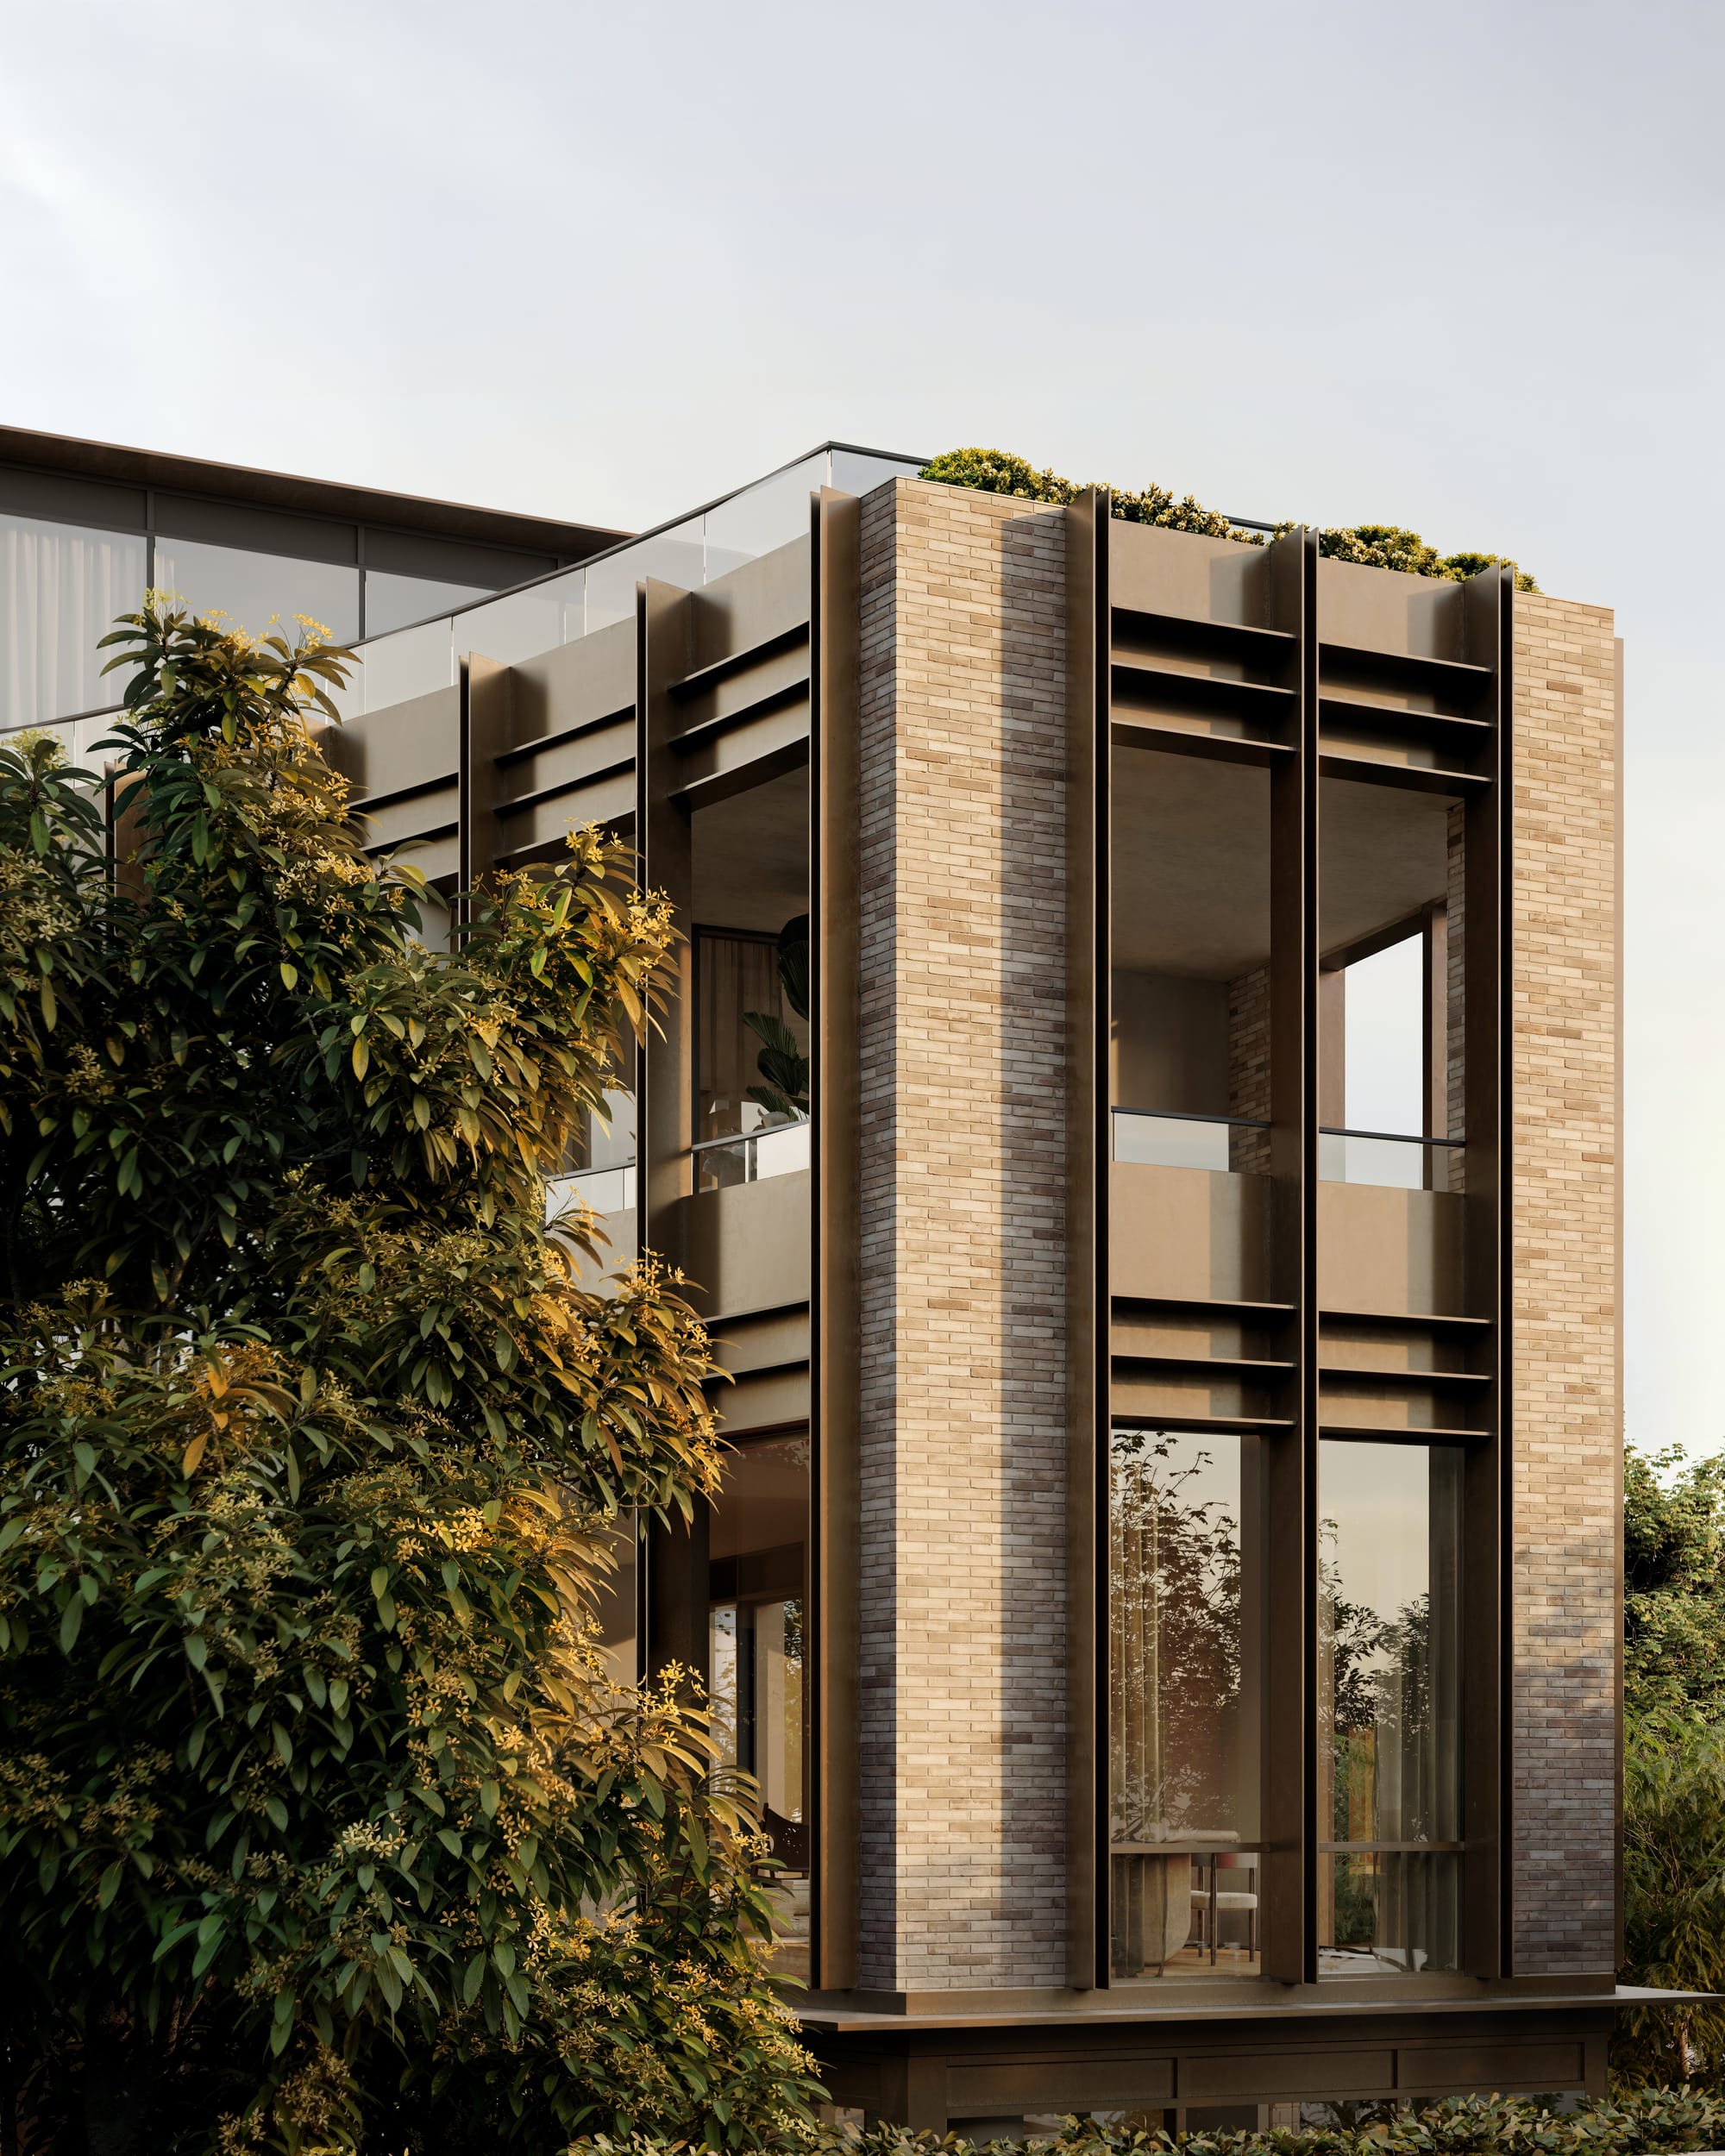 Sculpt Hawthorn by Mim Design, Parallel Workshop and Jack Merlo. Render copyright of Studio Piper. Facade of brick apartment block with floor-to-ceiling window accents. Rooftop garden. 